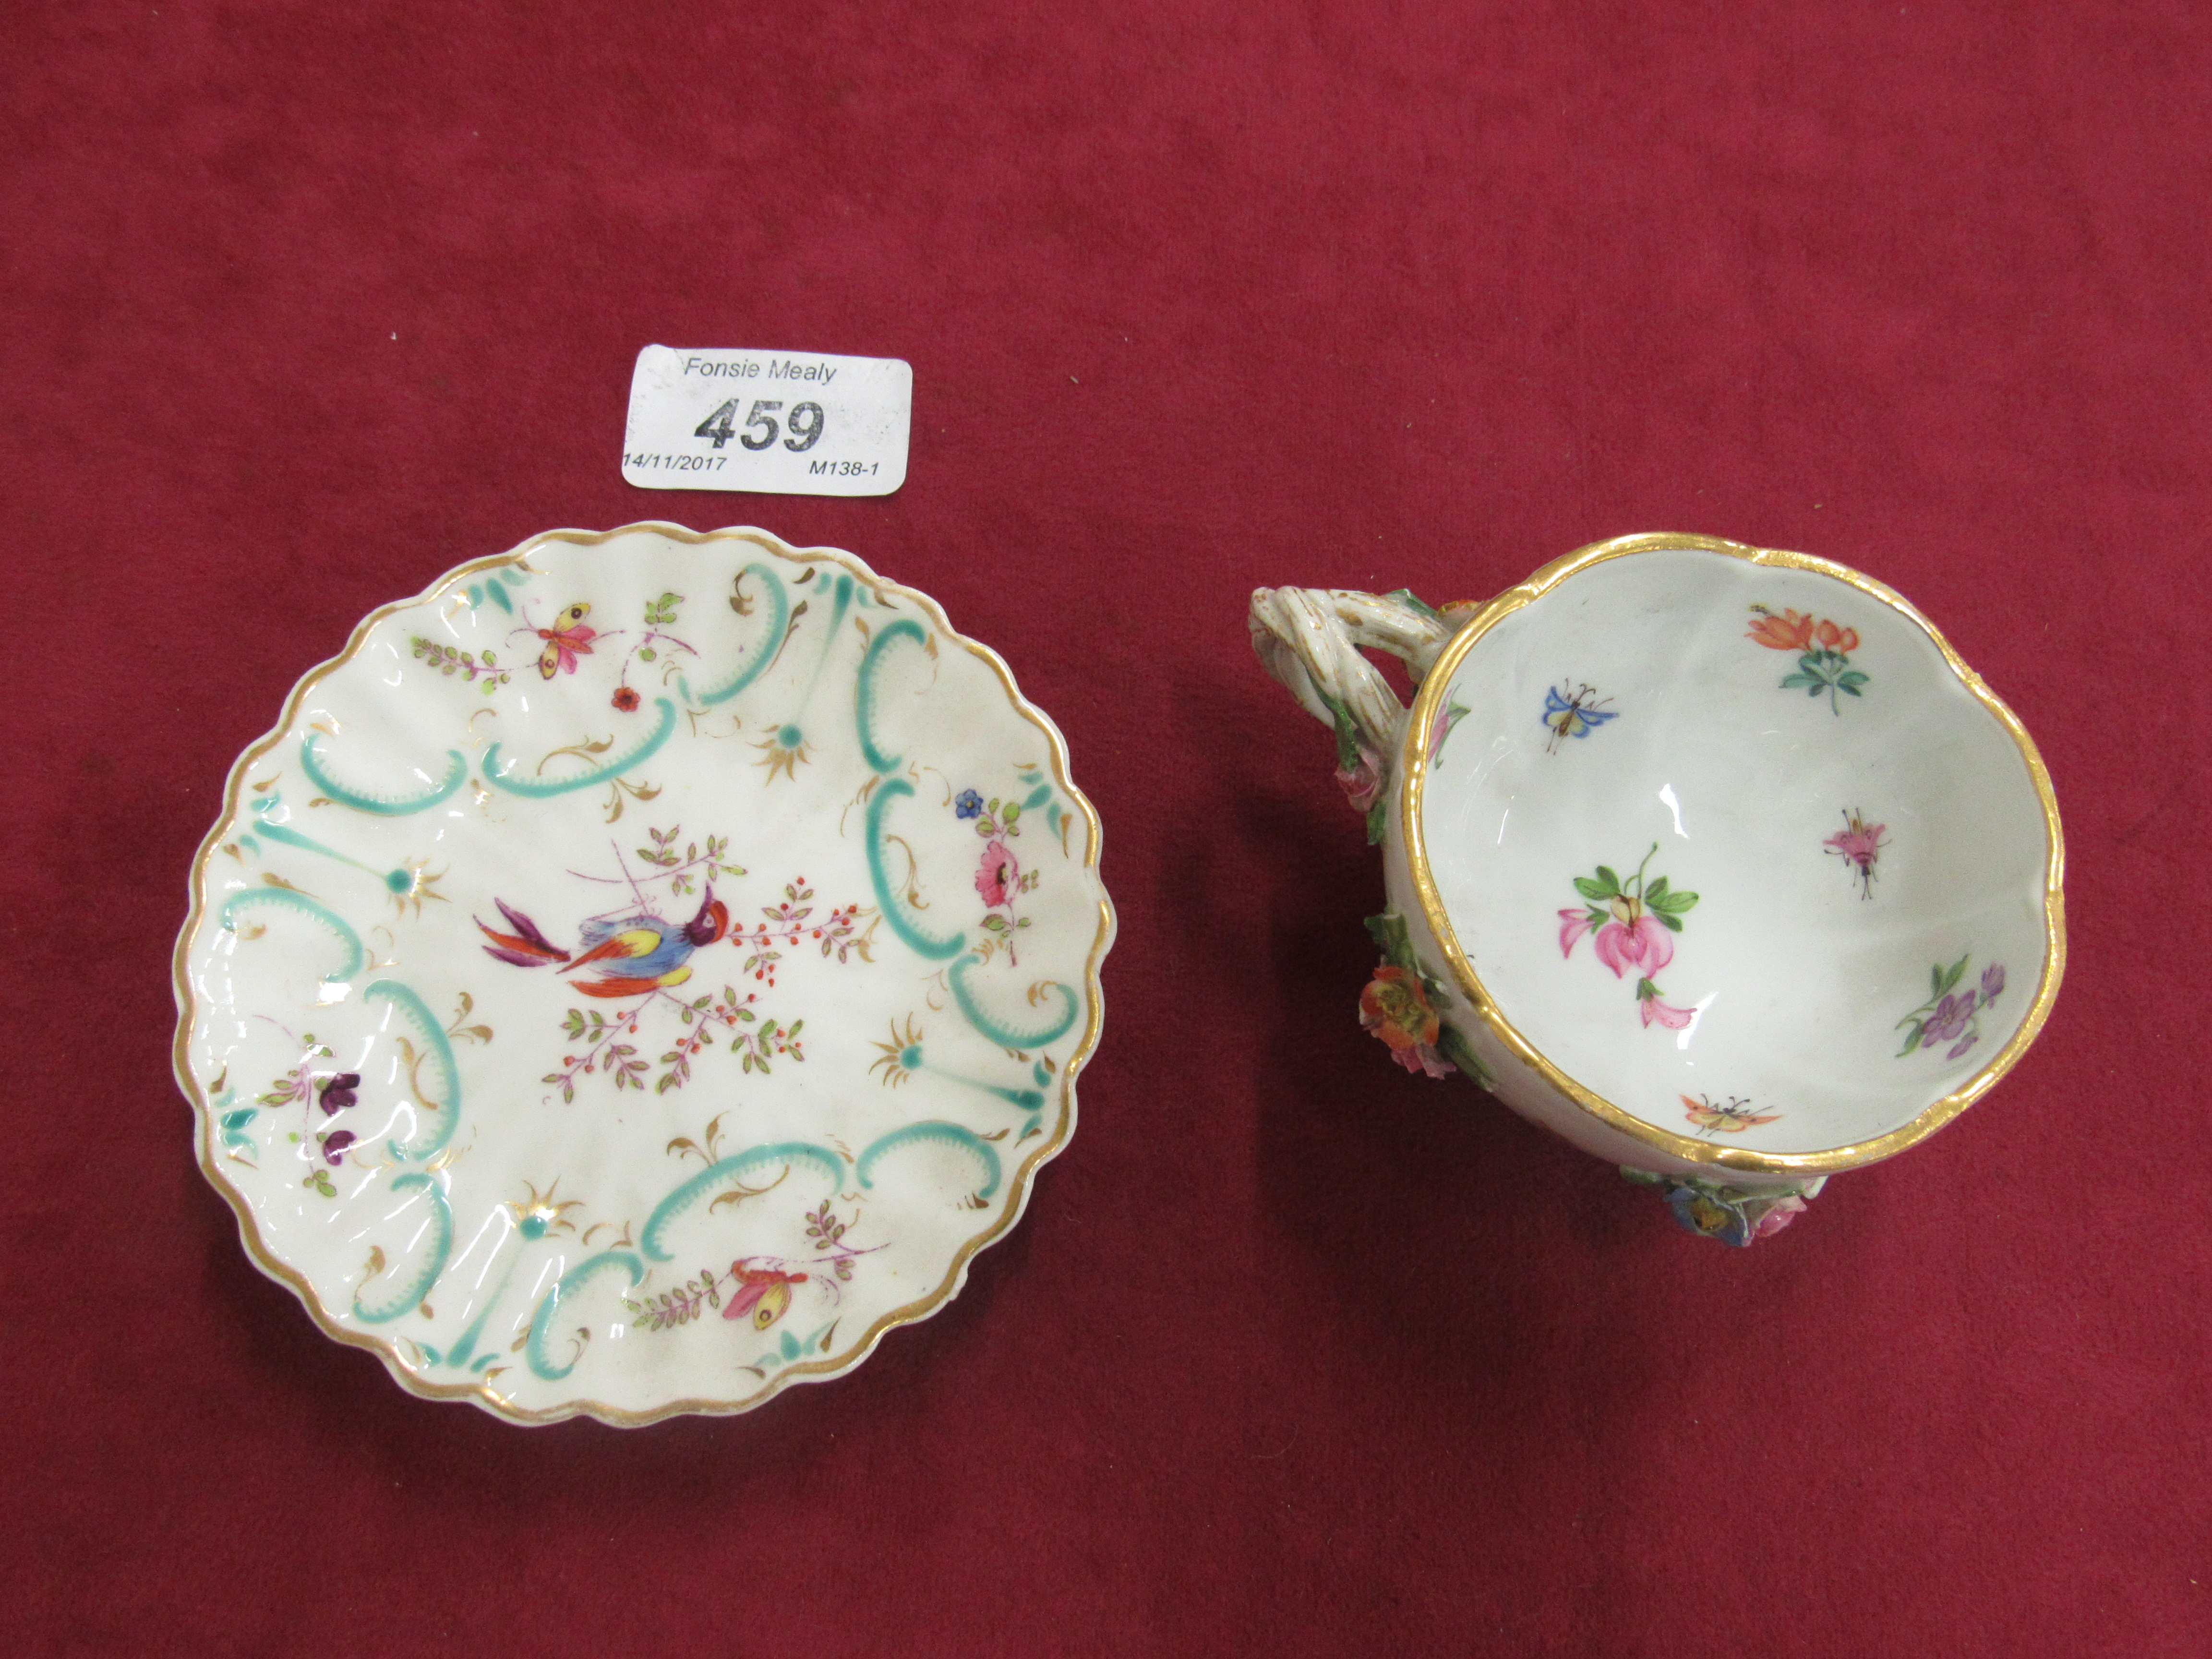 An attractive late 18th / early 19th Century Meissen Cup and Saucer, - Image 3 of 4